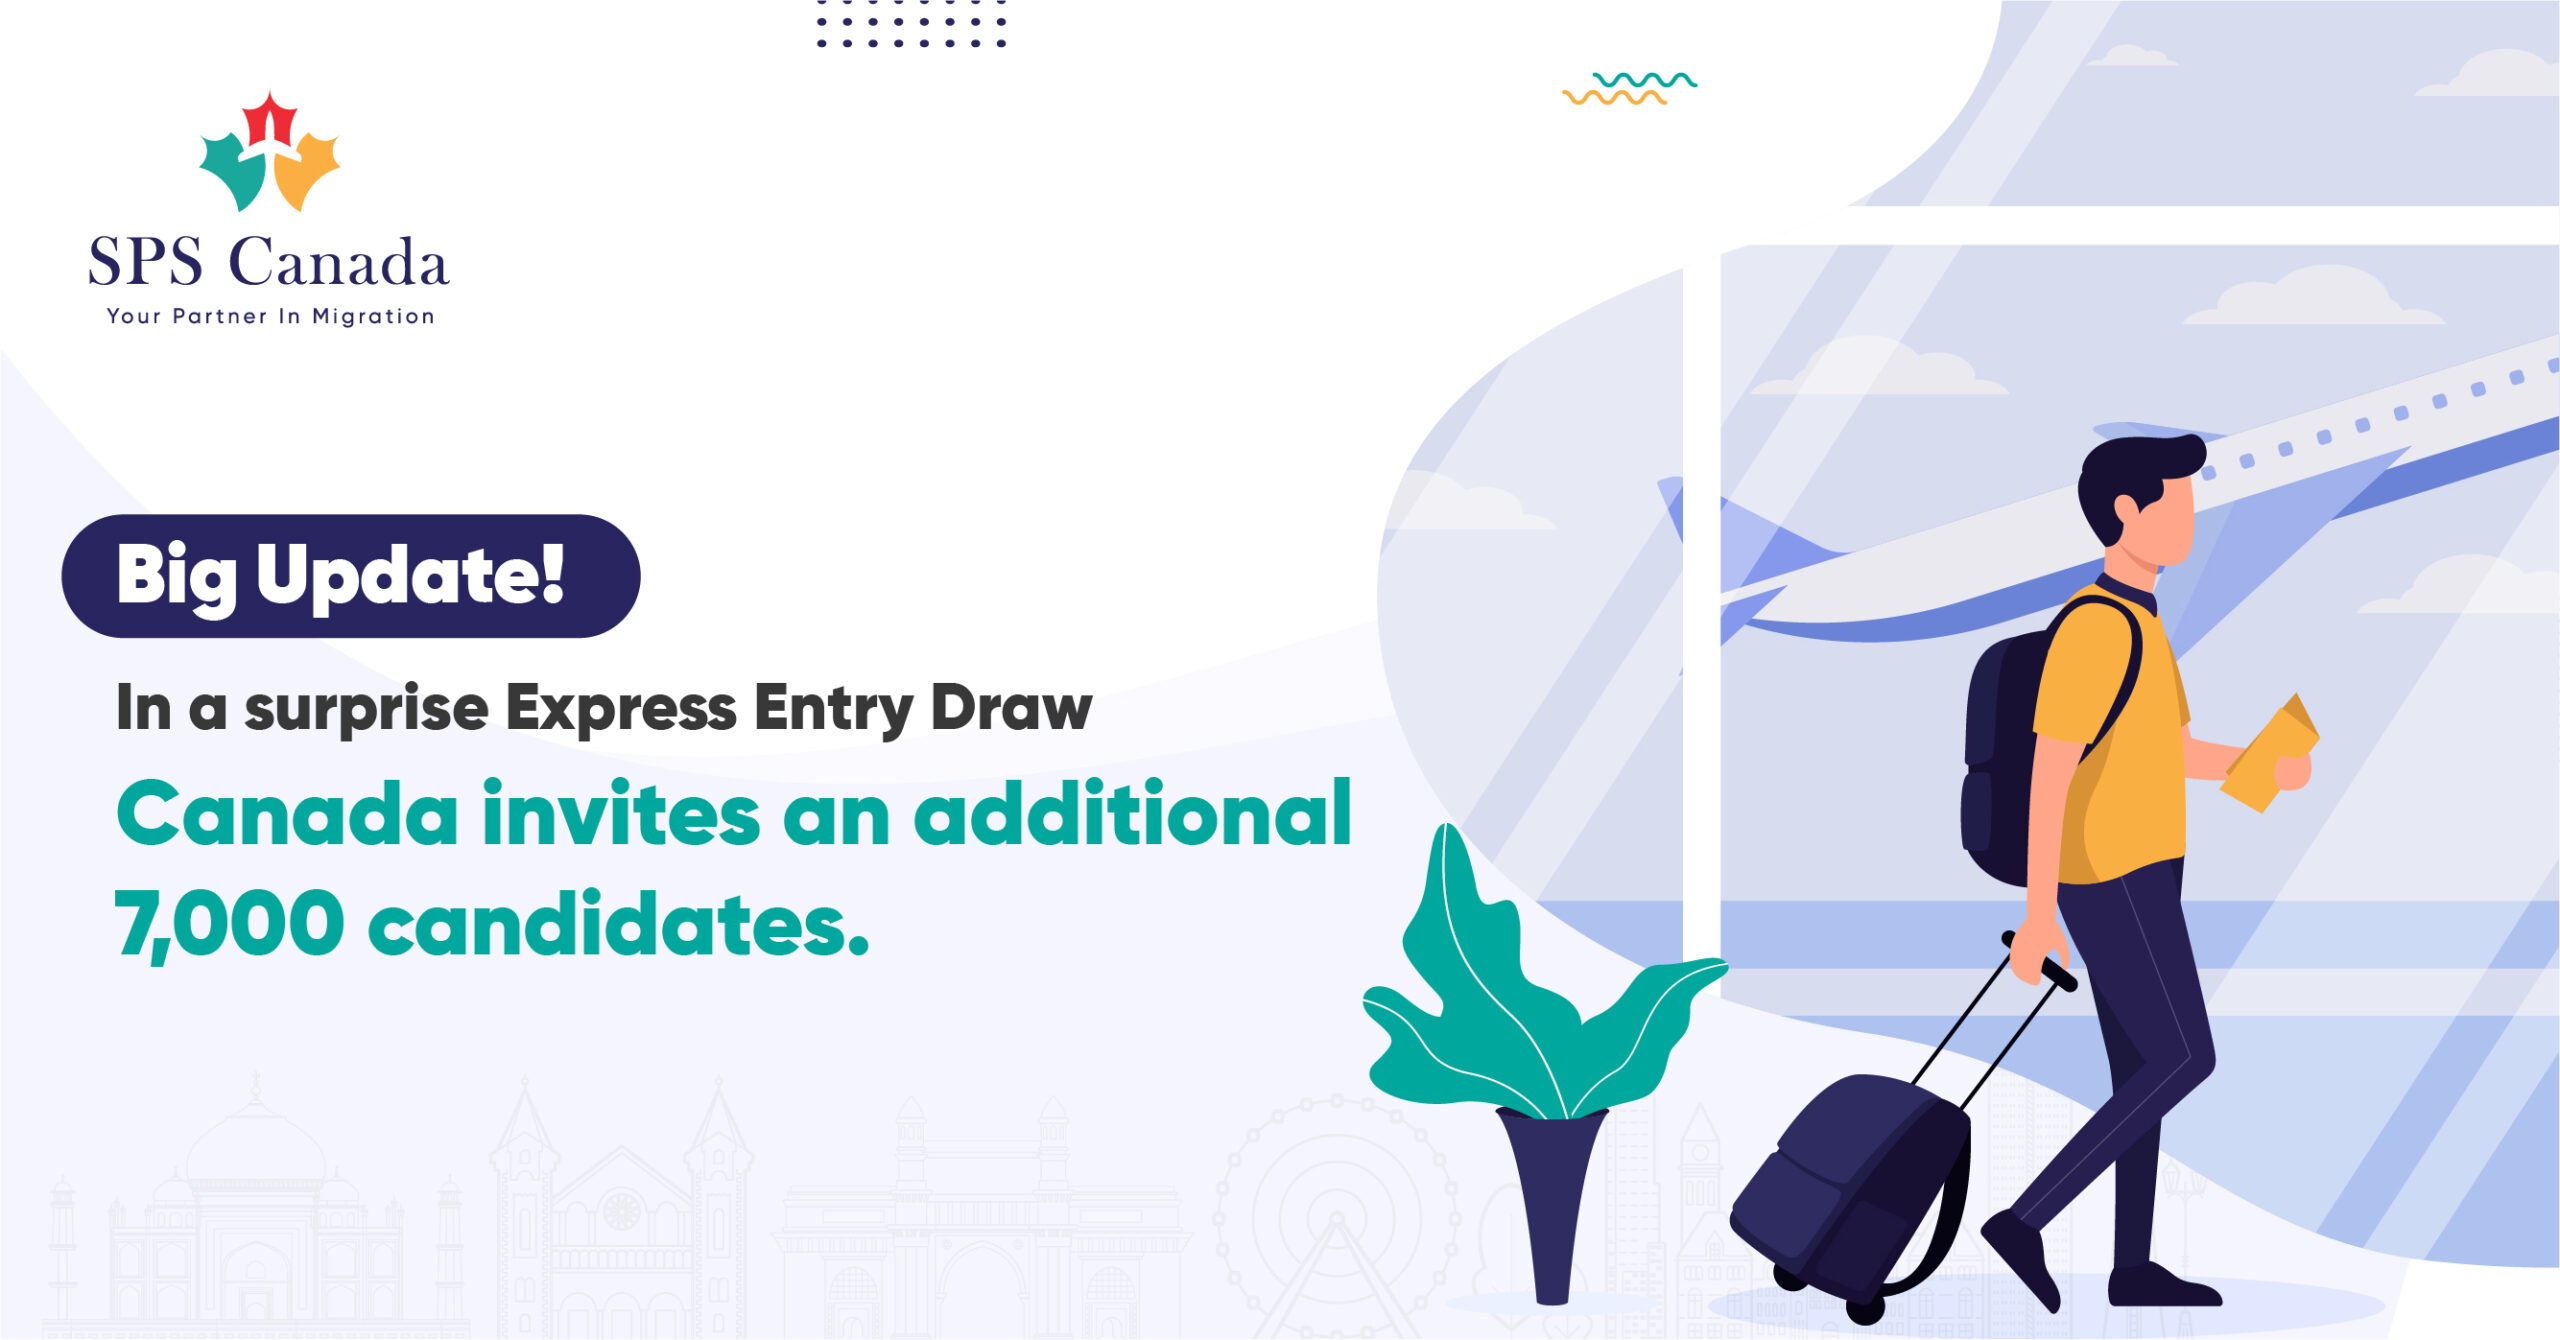 Next Express Entry Draw Canada invites 7000 new candidates